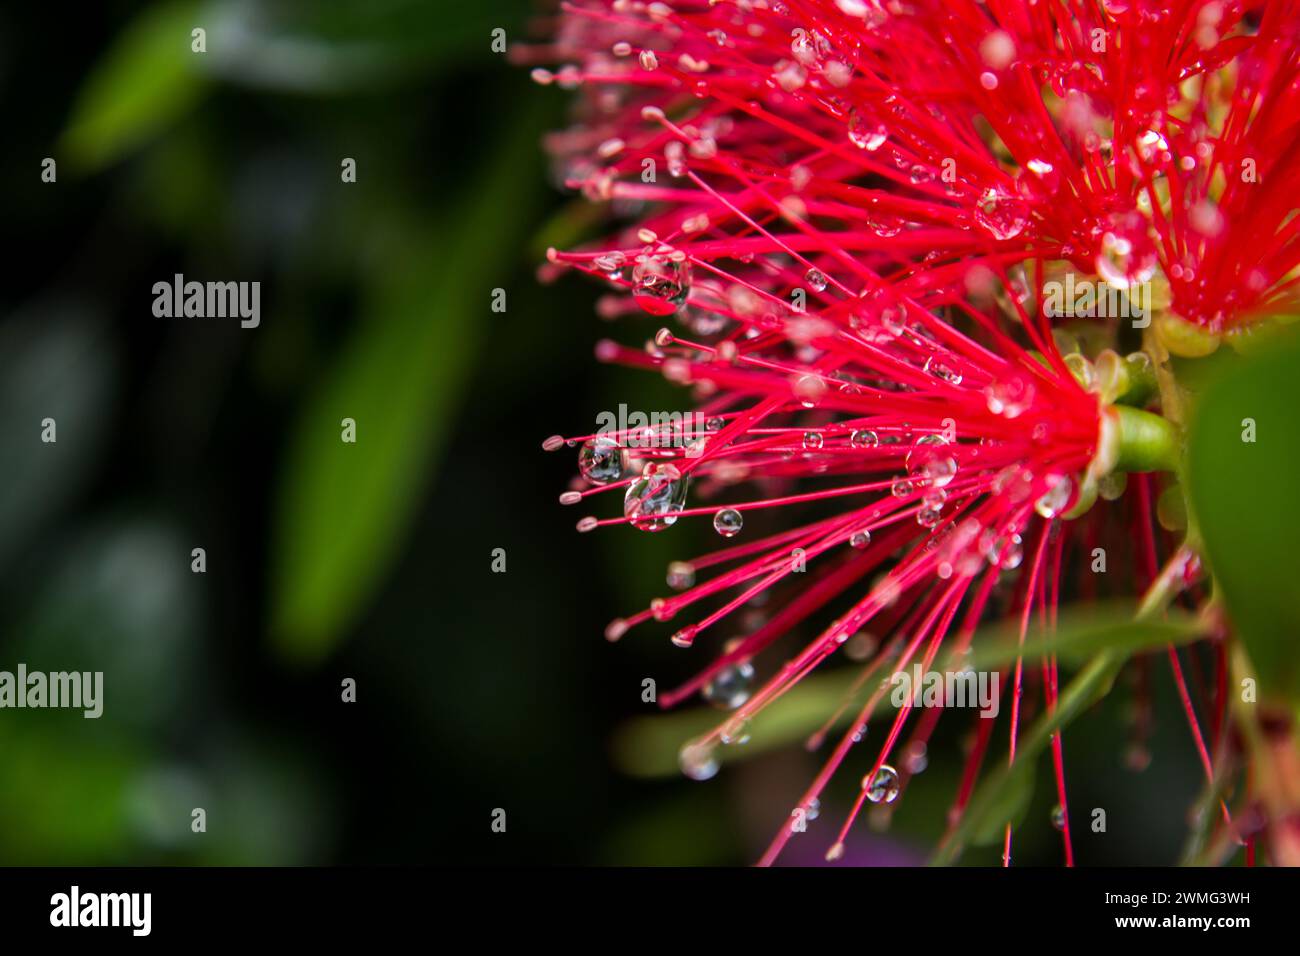 Waterdrops, hanging from the red filaments of a Weeping Bottlebrush flower. Stock Photo